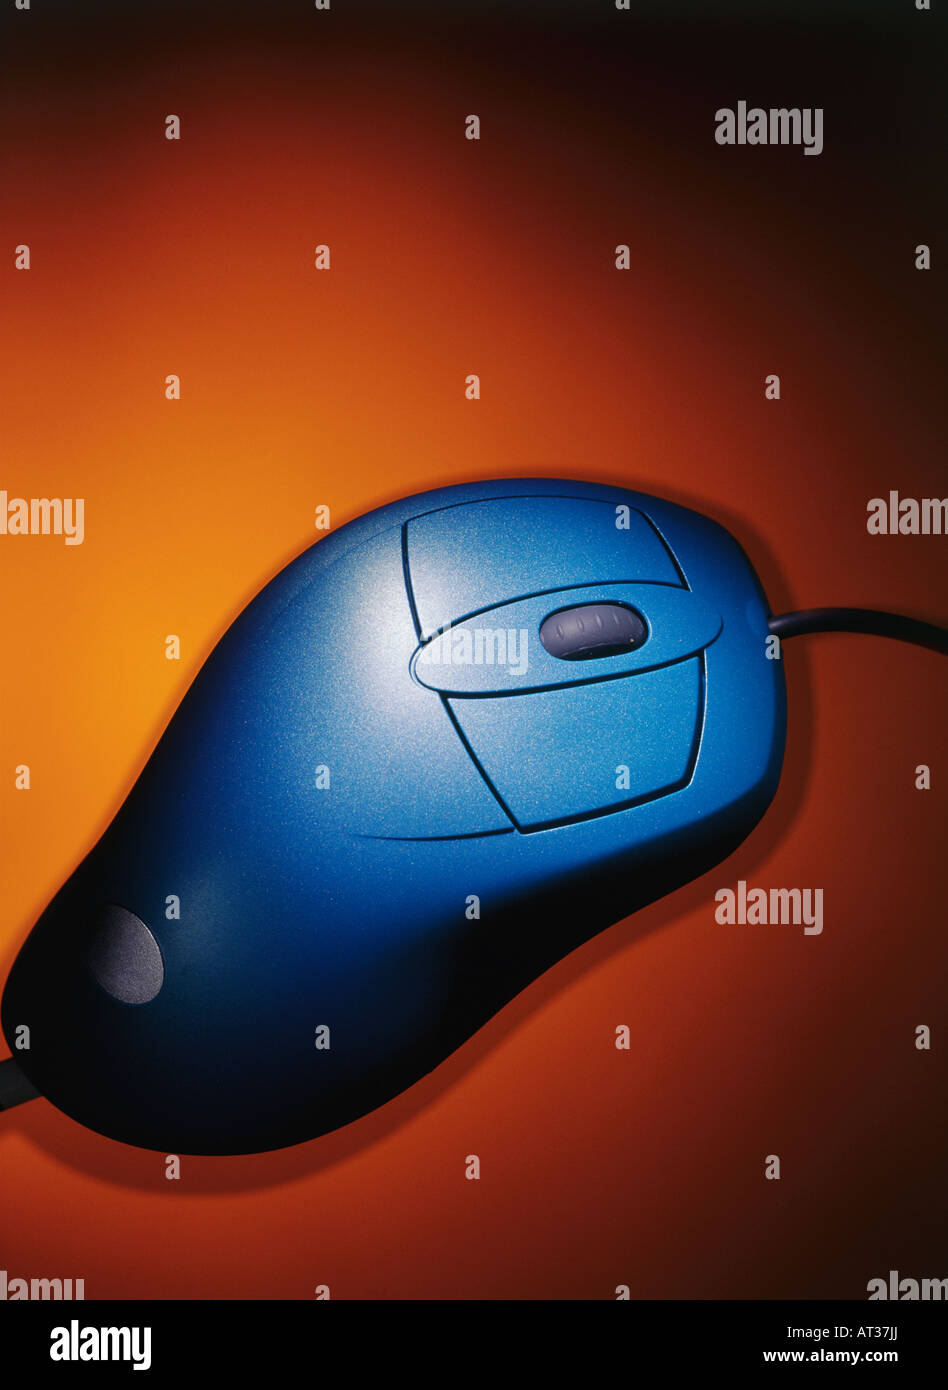 A computer mouse Stock Photo